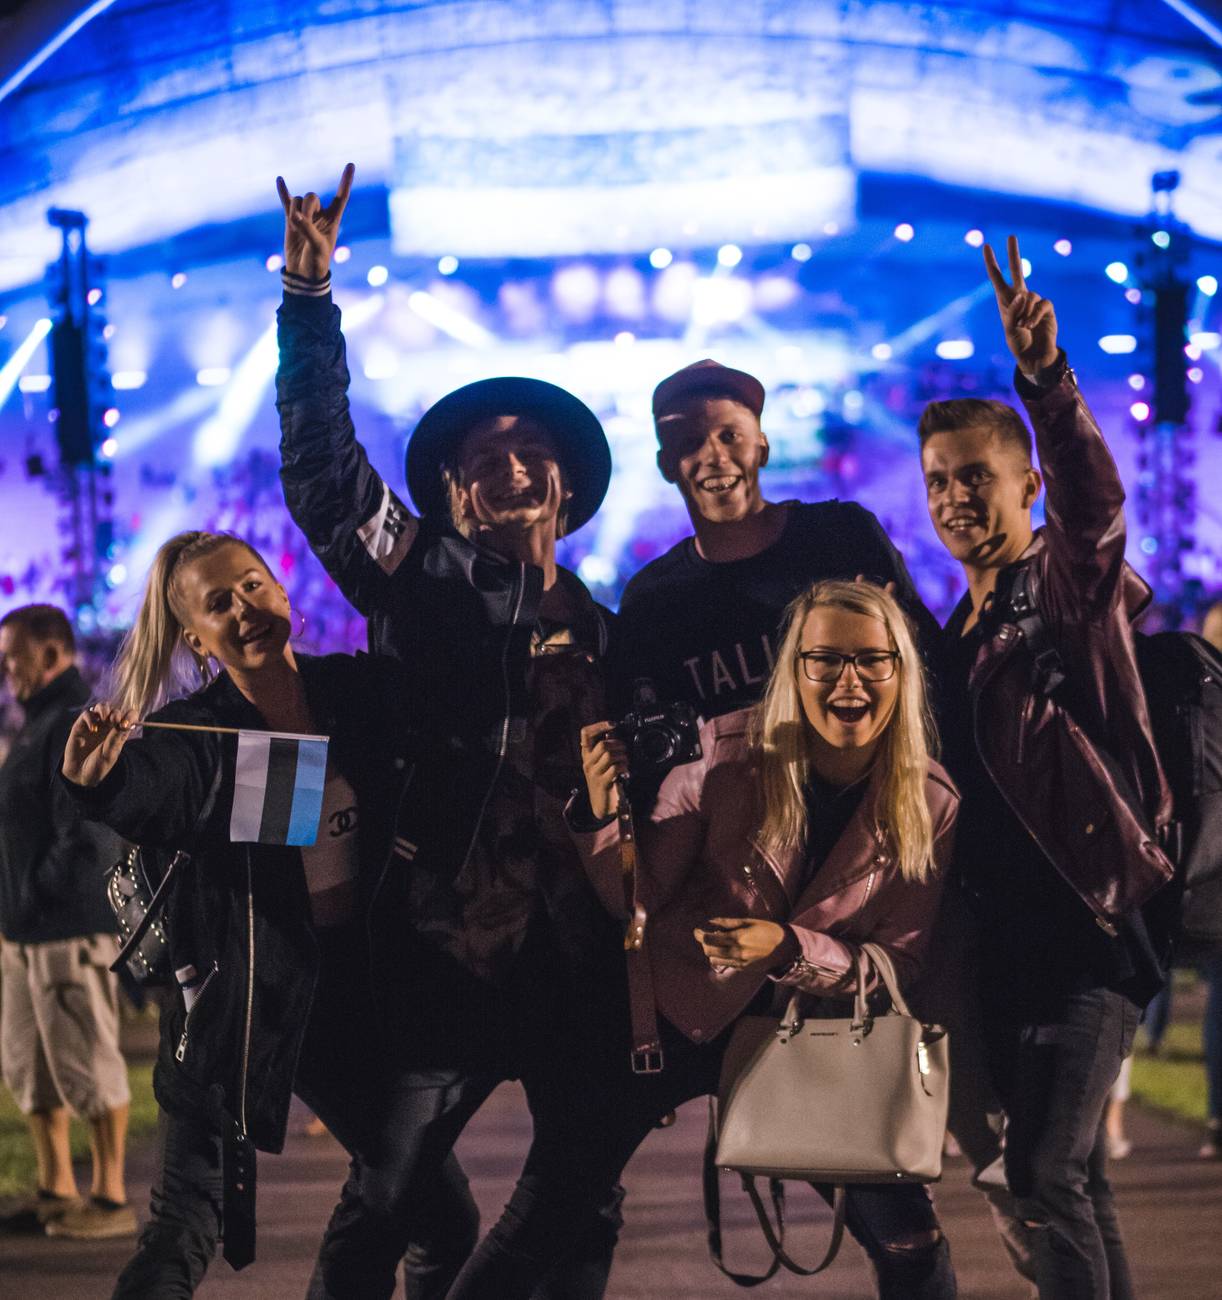 Young people having fun at Tallinn Song Festival Grounds Photo by: Mark Harrison